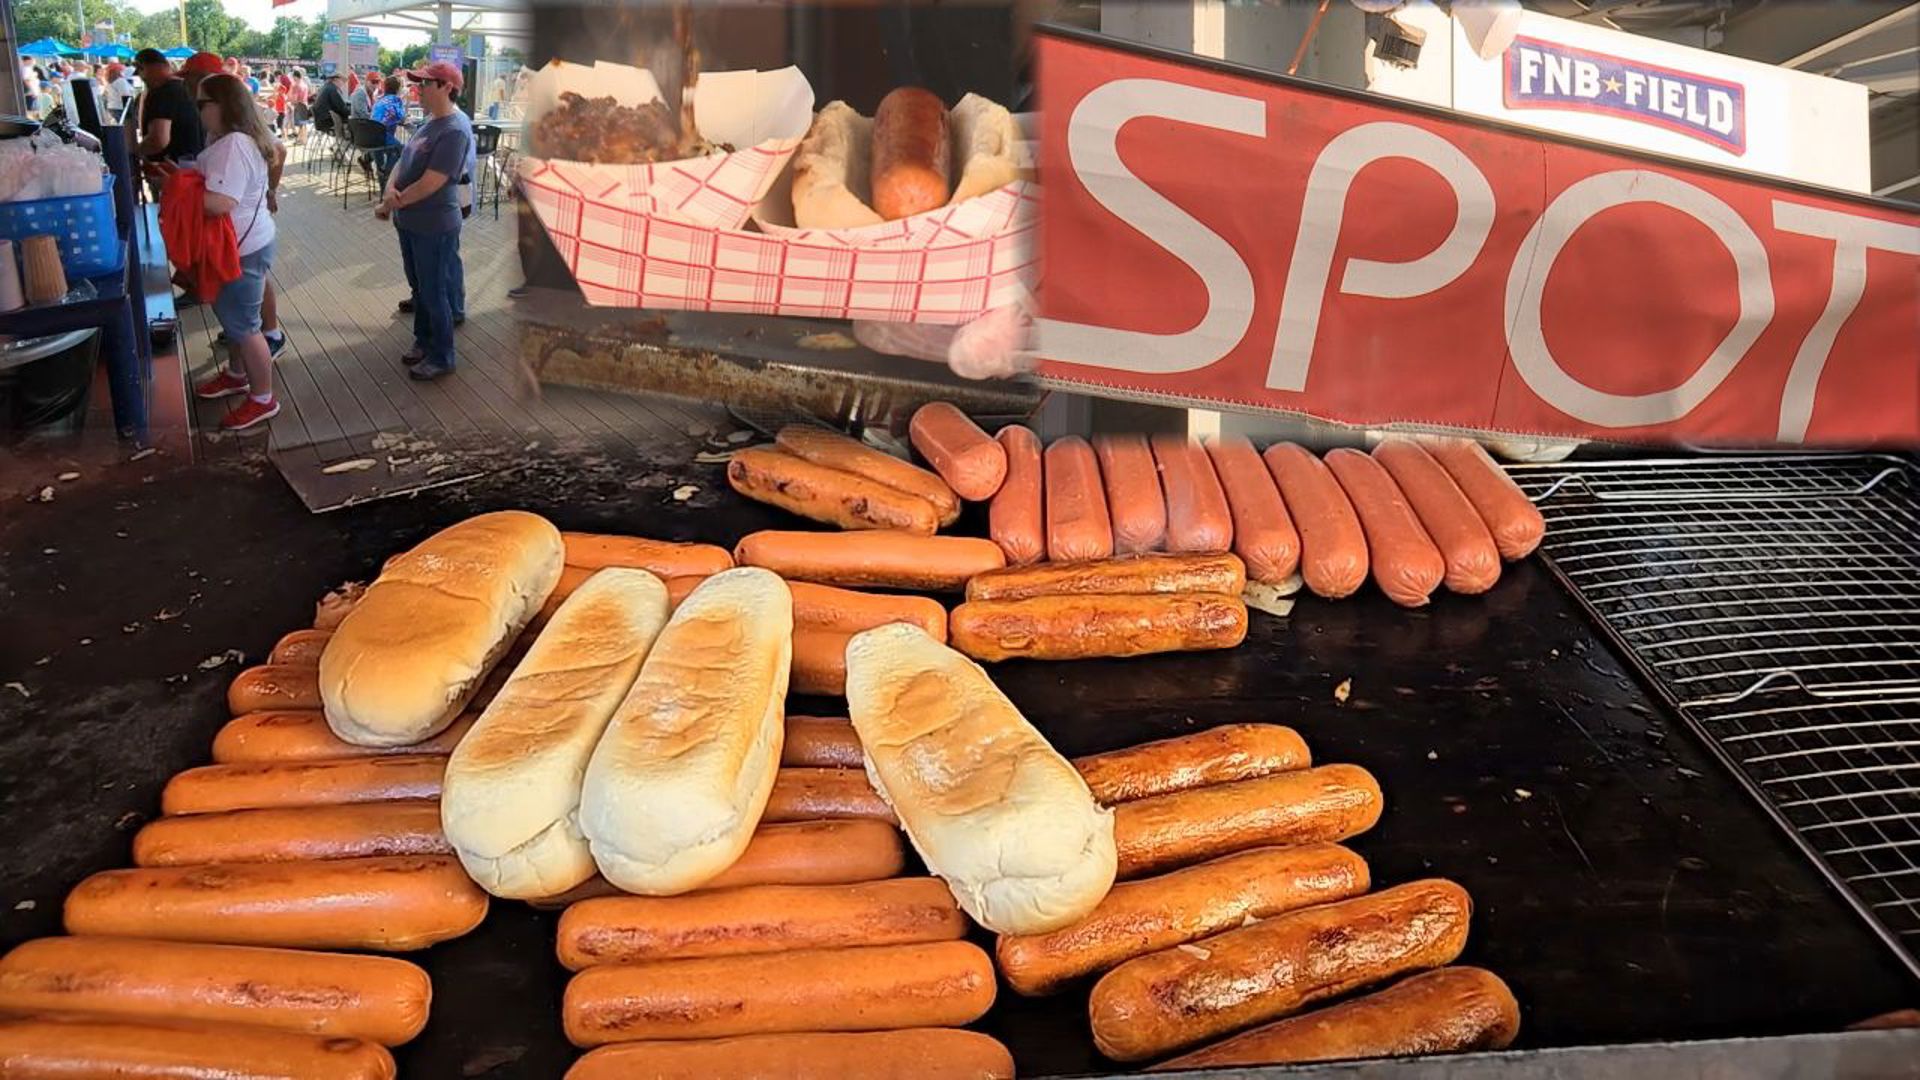 For 85 years, The Spot has been the top dog for hot dogs in South Central Pennsylvania.